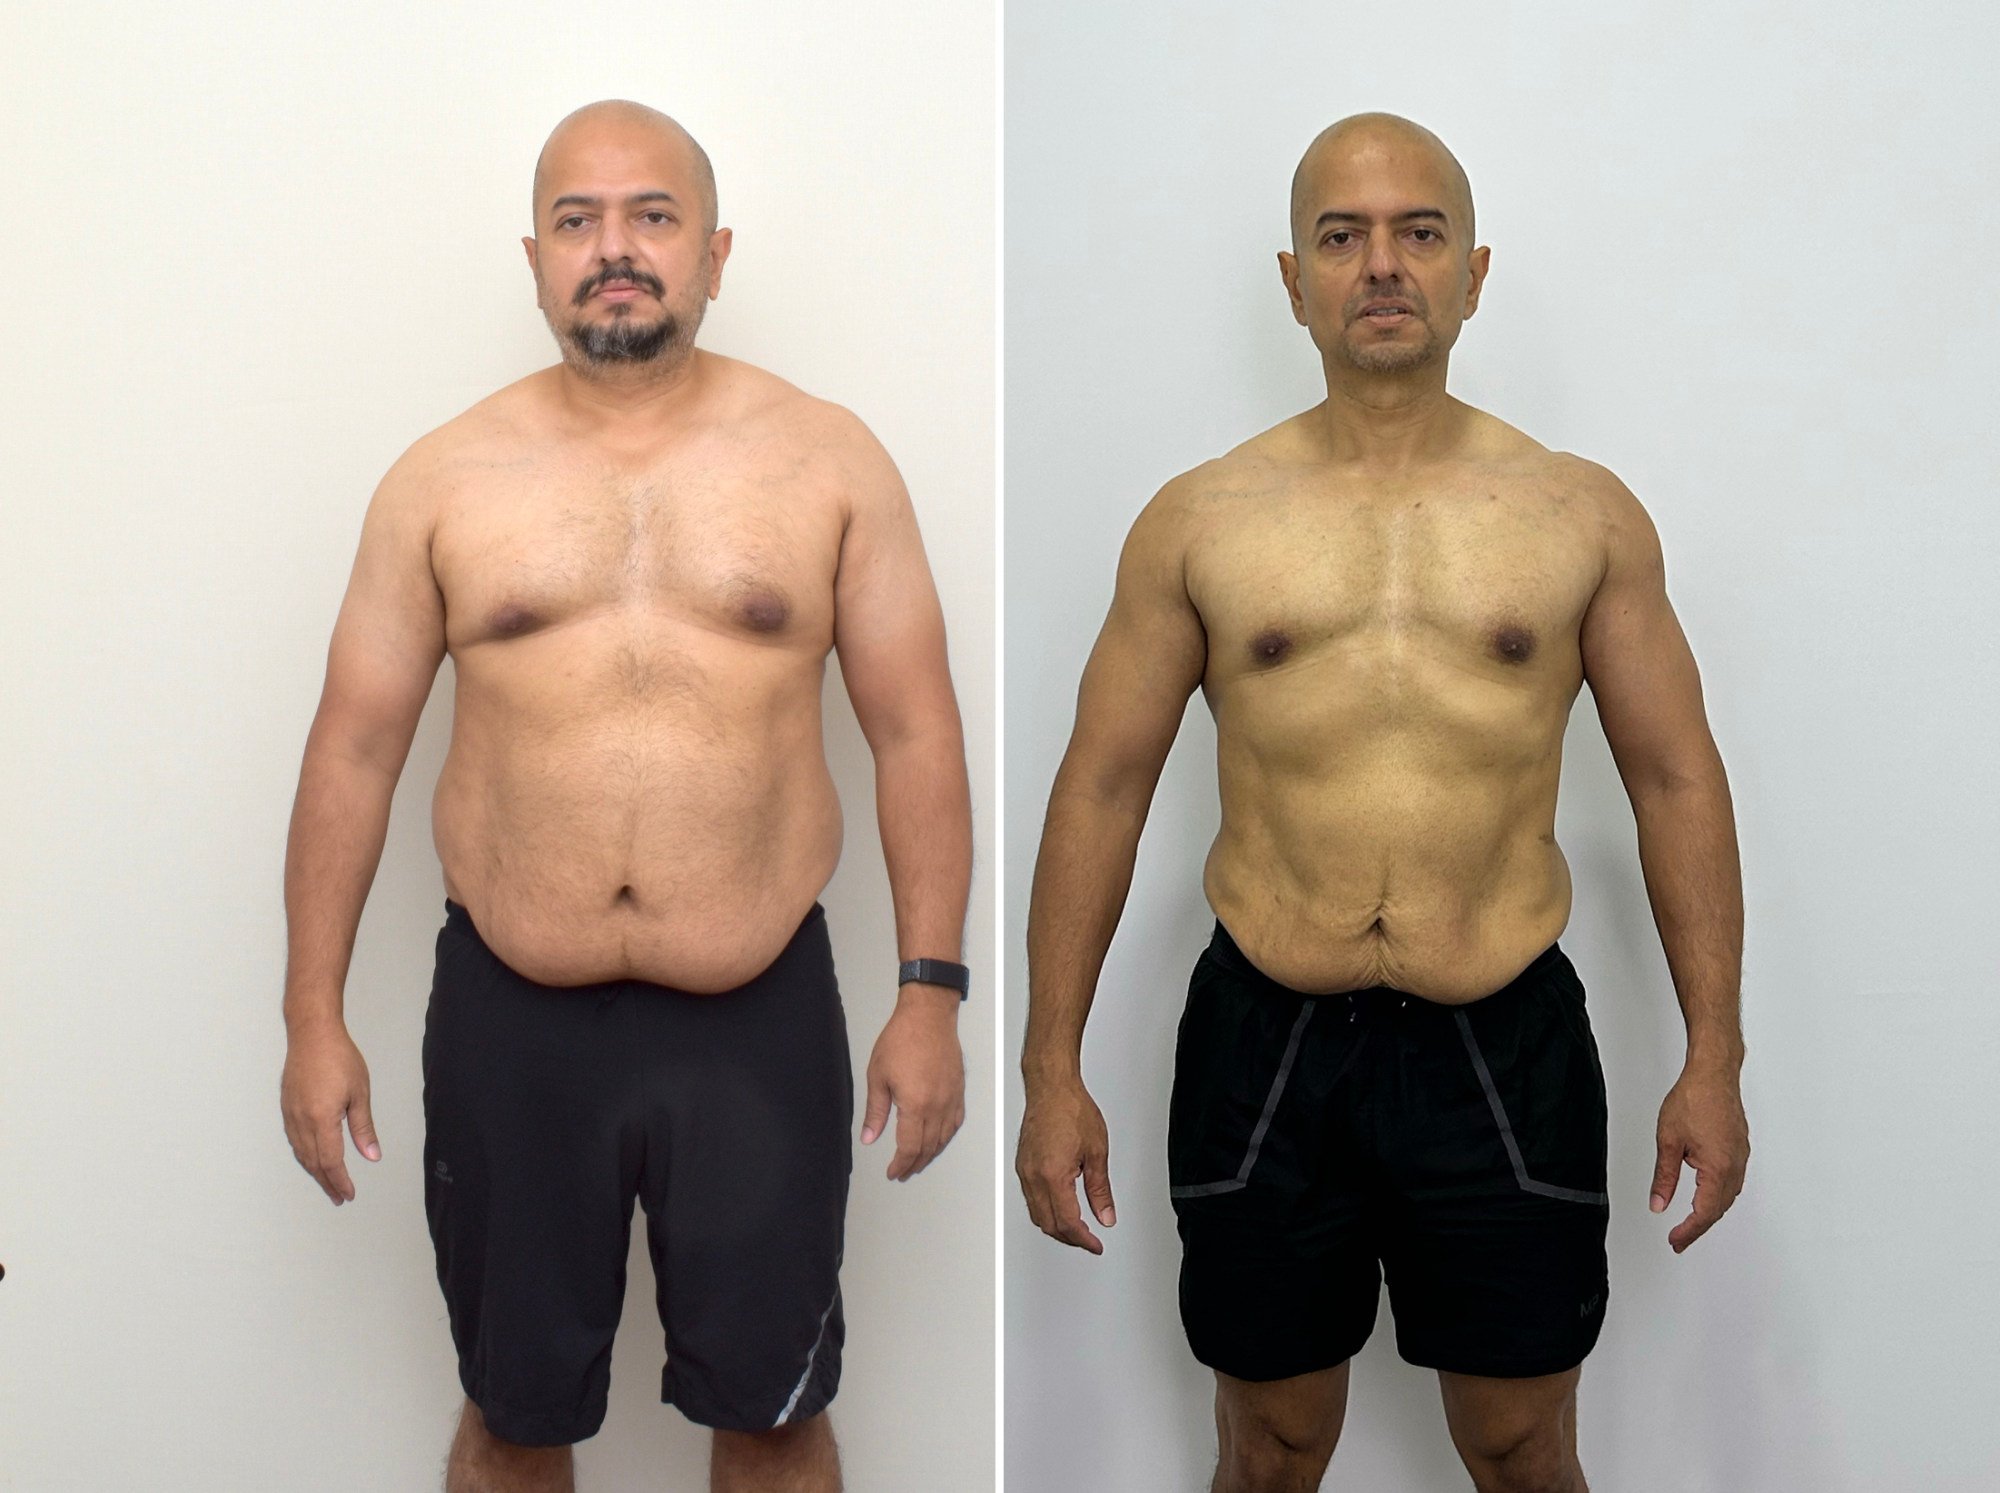 How to lose weight and keep it off: this dad shed 29kg through keto diet,  intermittent fasting, strength training and daily walks